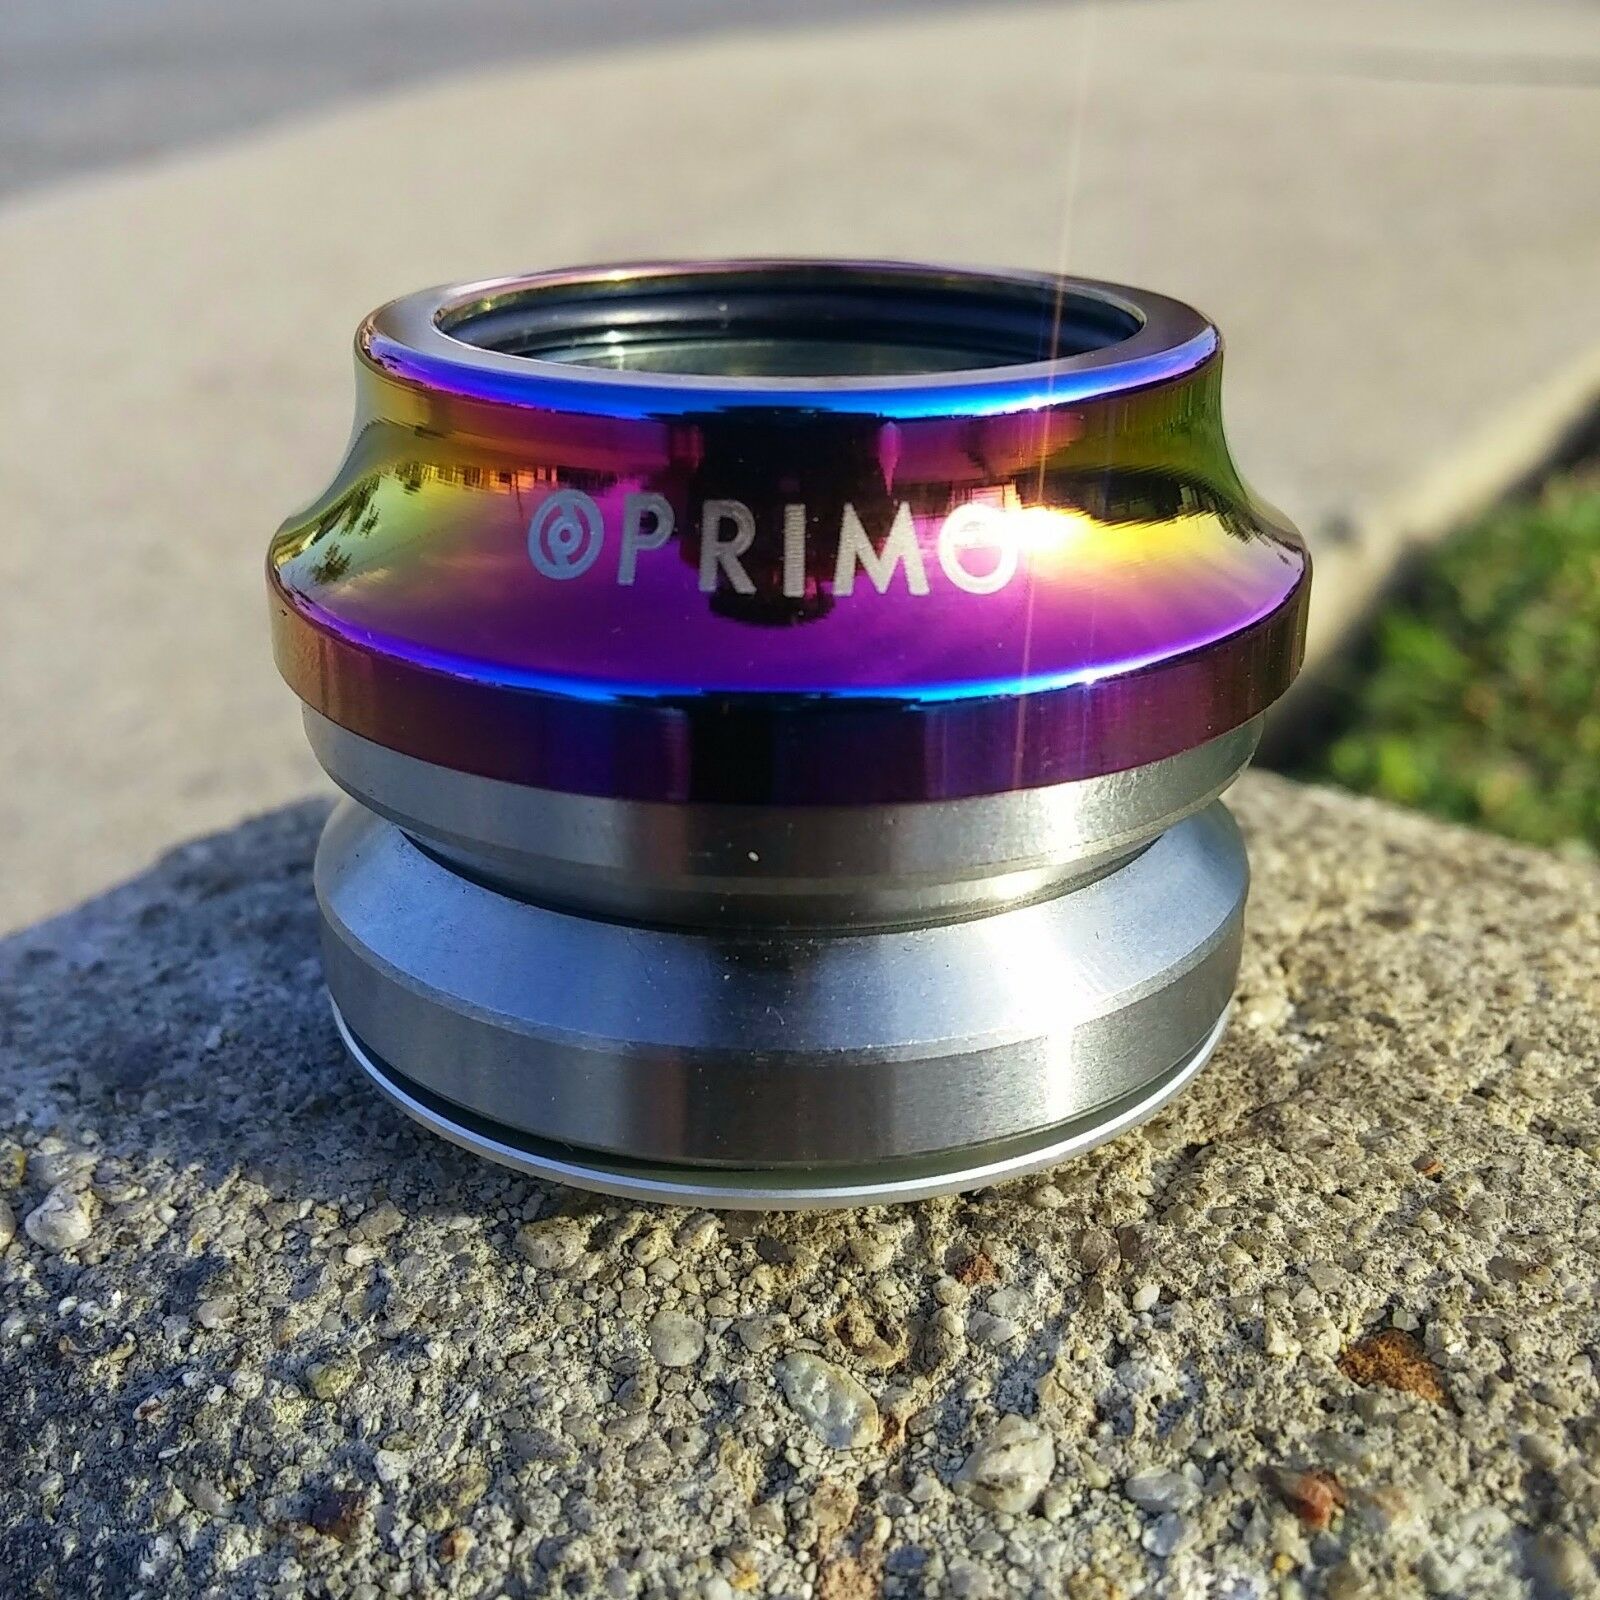 Primo Bmx Bike Integrated Bicycle Headset Oil Slick Fit Cult Odyssey Sunday